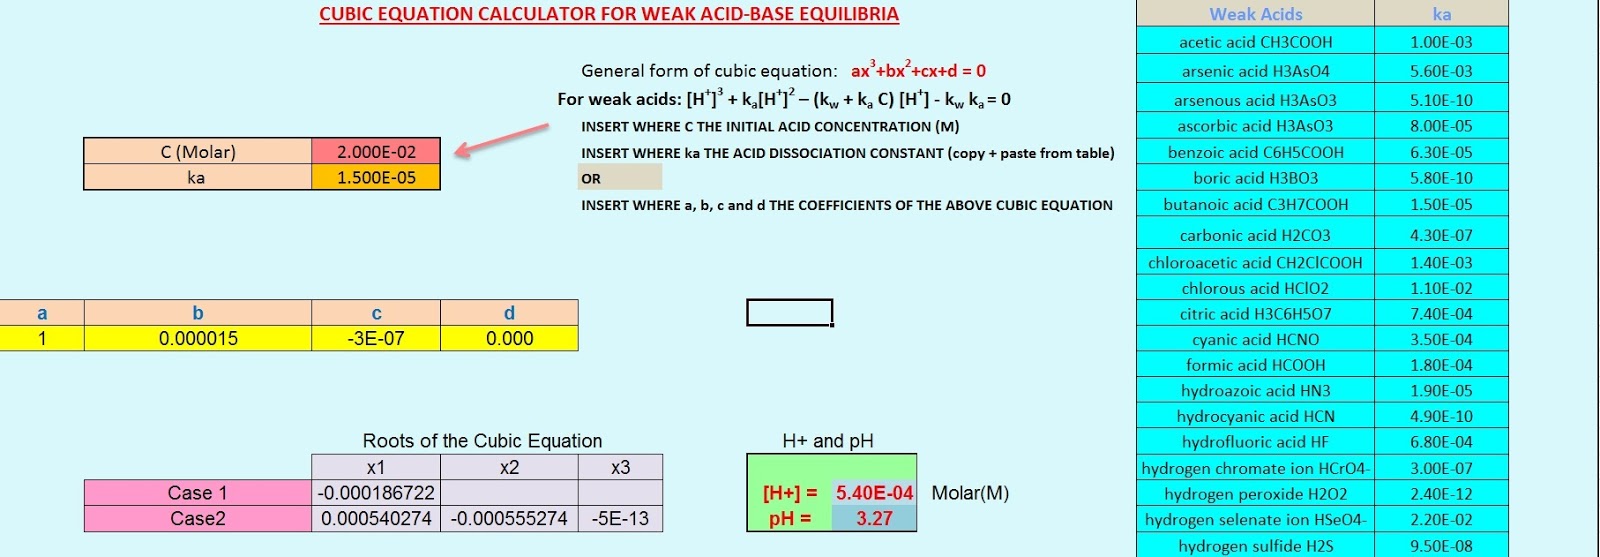 Fig. I.1: The cubic equation calculator for weak acid-base equilibria. By inserting values for the initial acid concentration C(Molar)  and for the acid dissociation constant (values are shown in the table for the most common weak acids) the [H+] and pH values of the solution are calculated